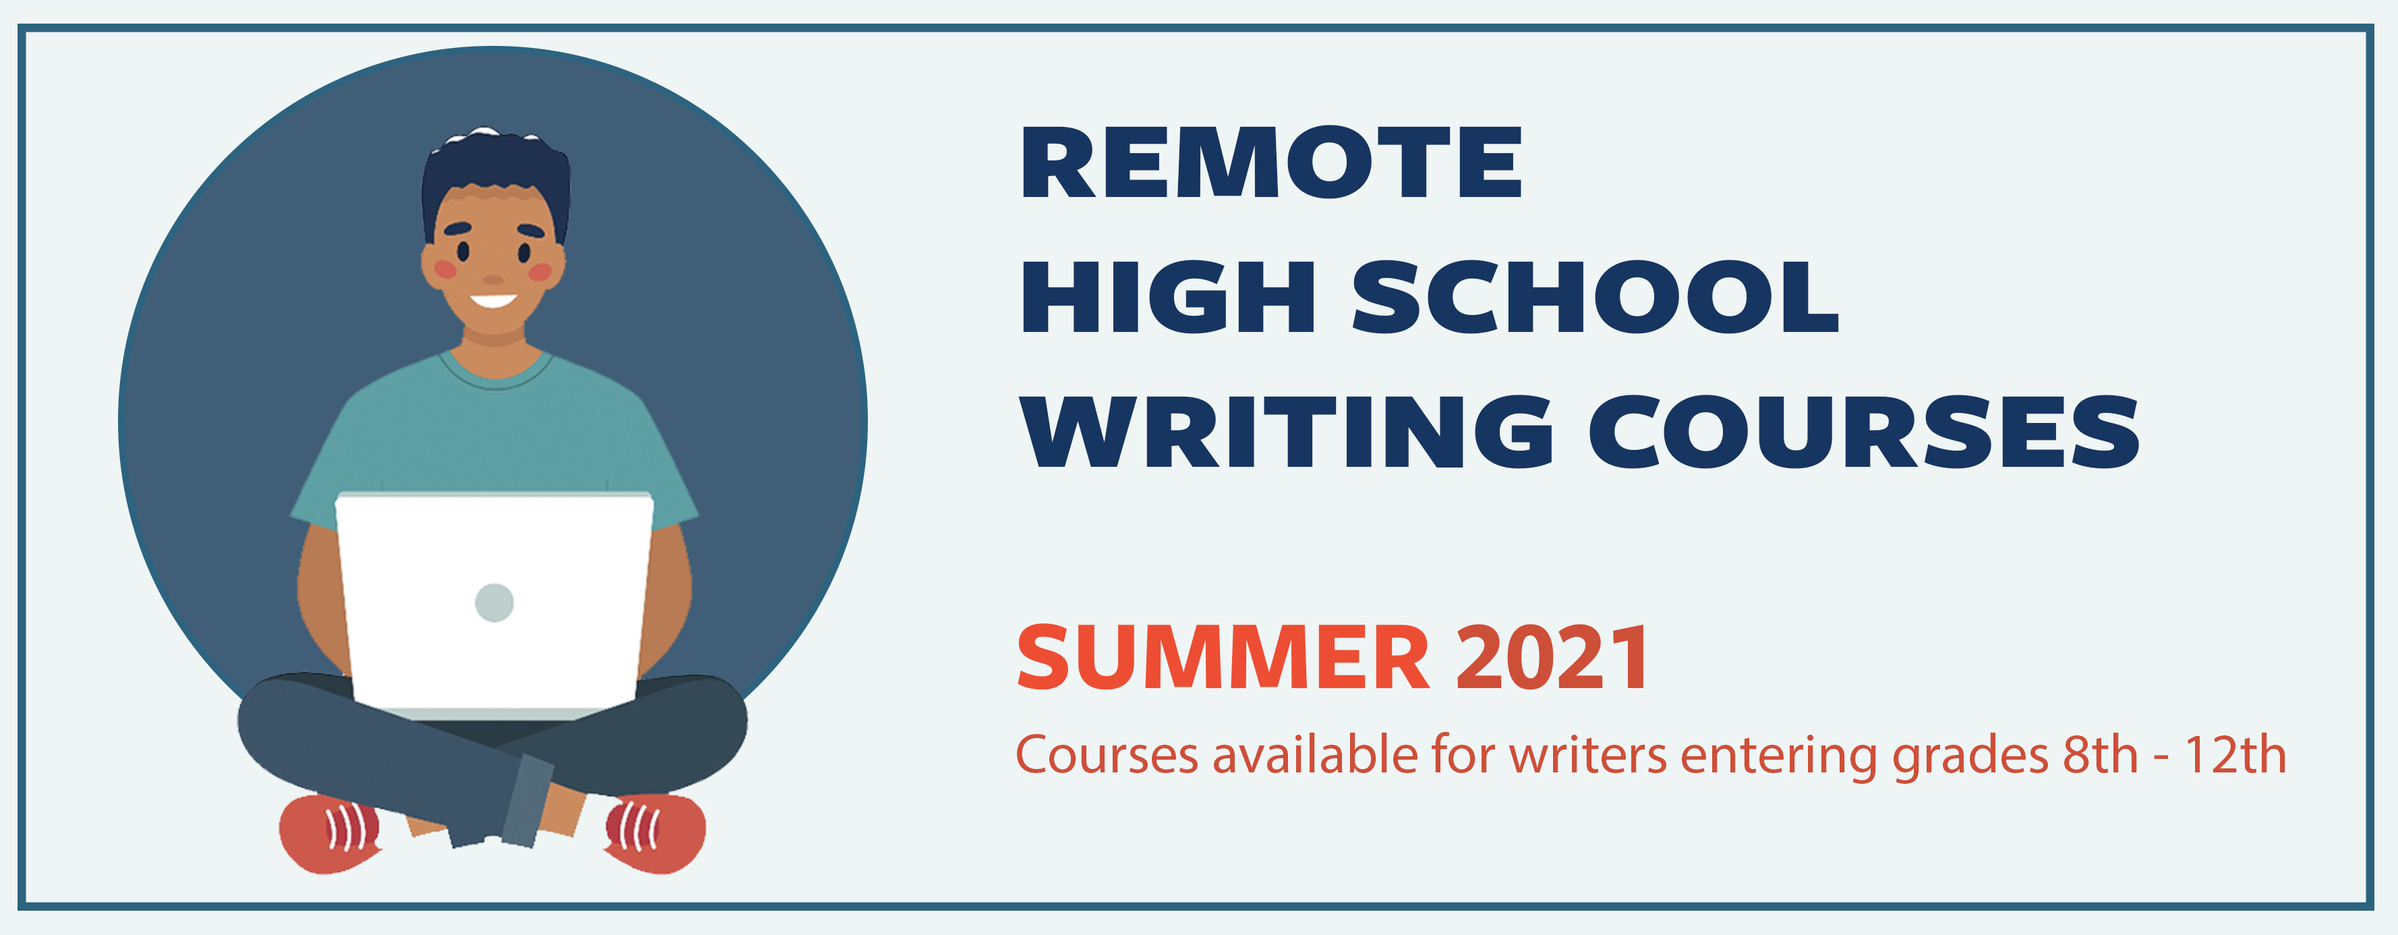 Registration for High School Remote Writing Courses